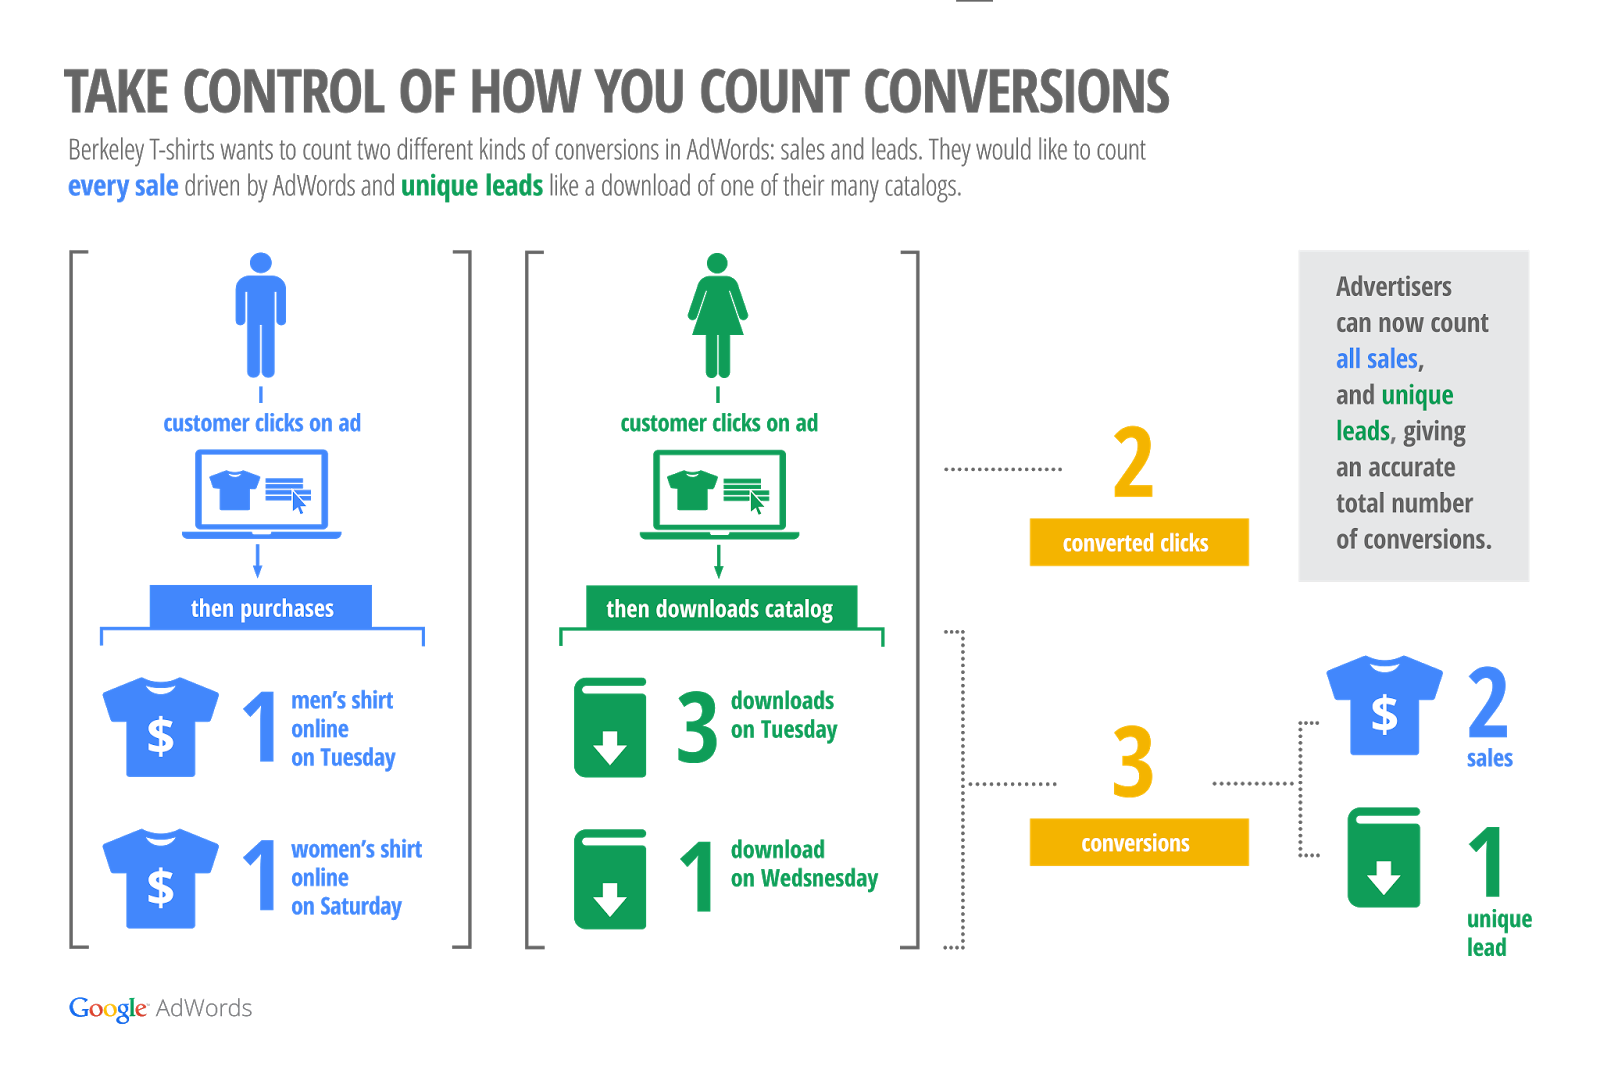 inside-adwords-a-new-way-to-count-conversions-in-adwords